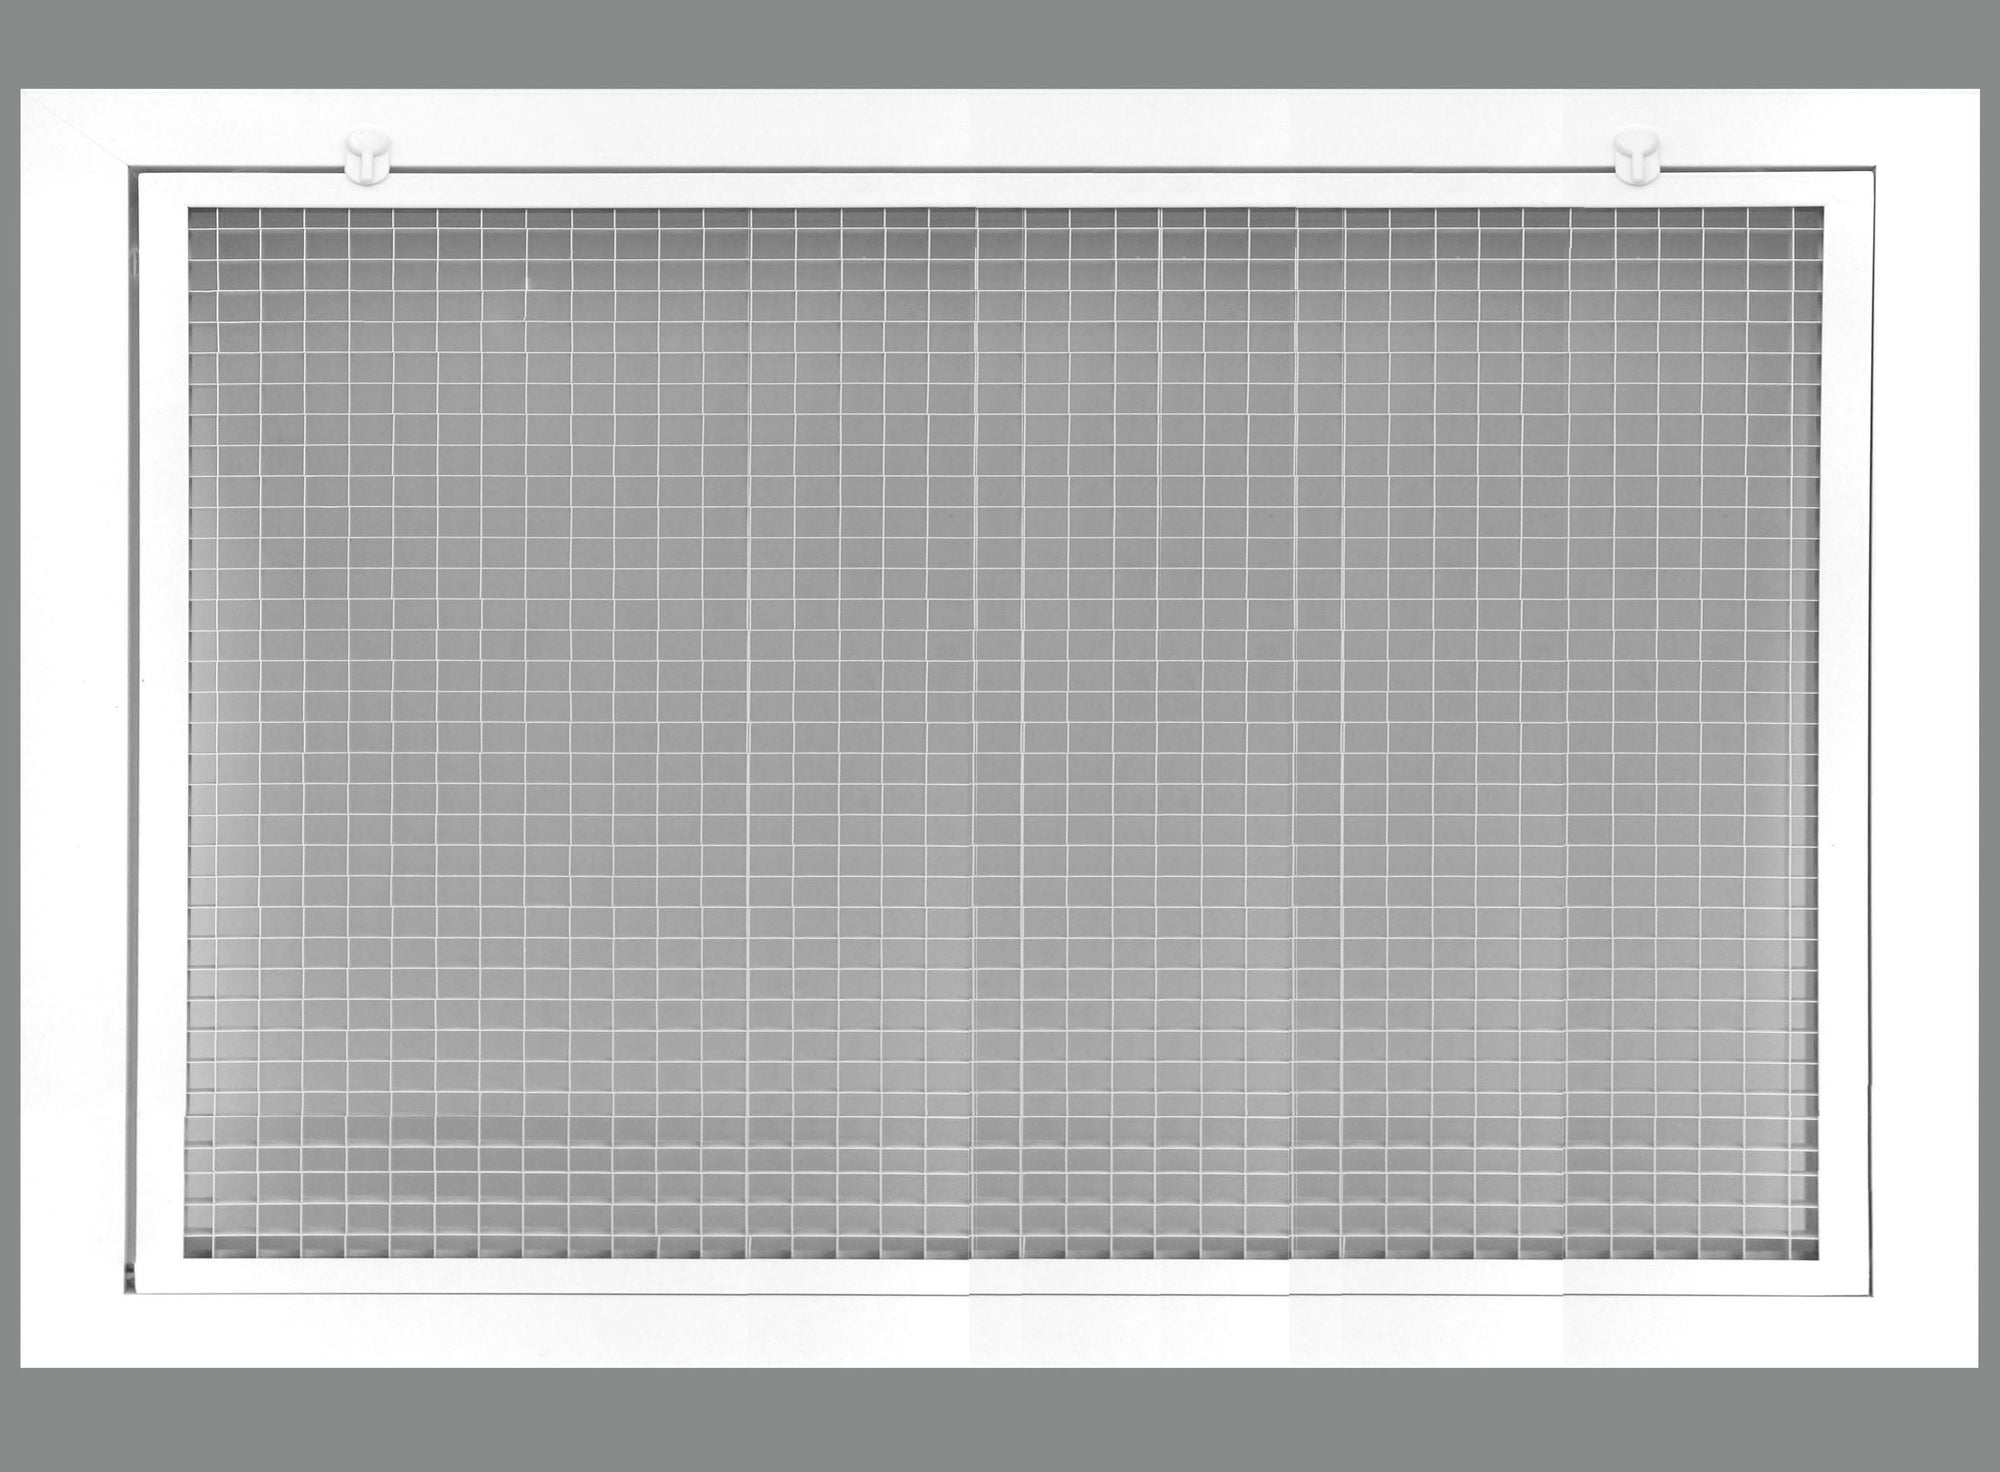 18" x 12" Cube Core Eggcrate Return Air Filter Grille for 1" Filter